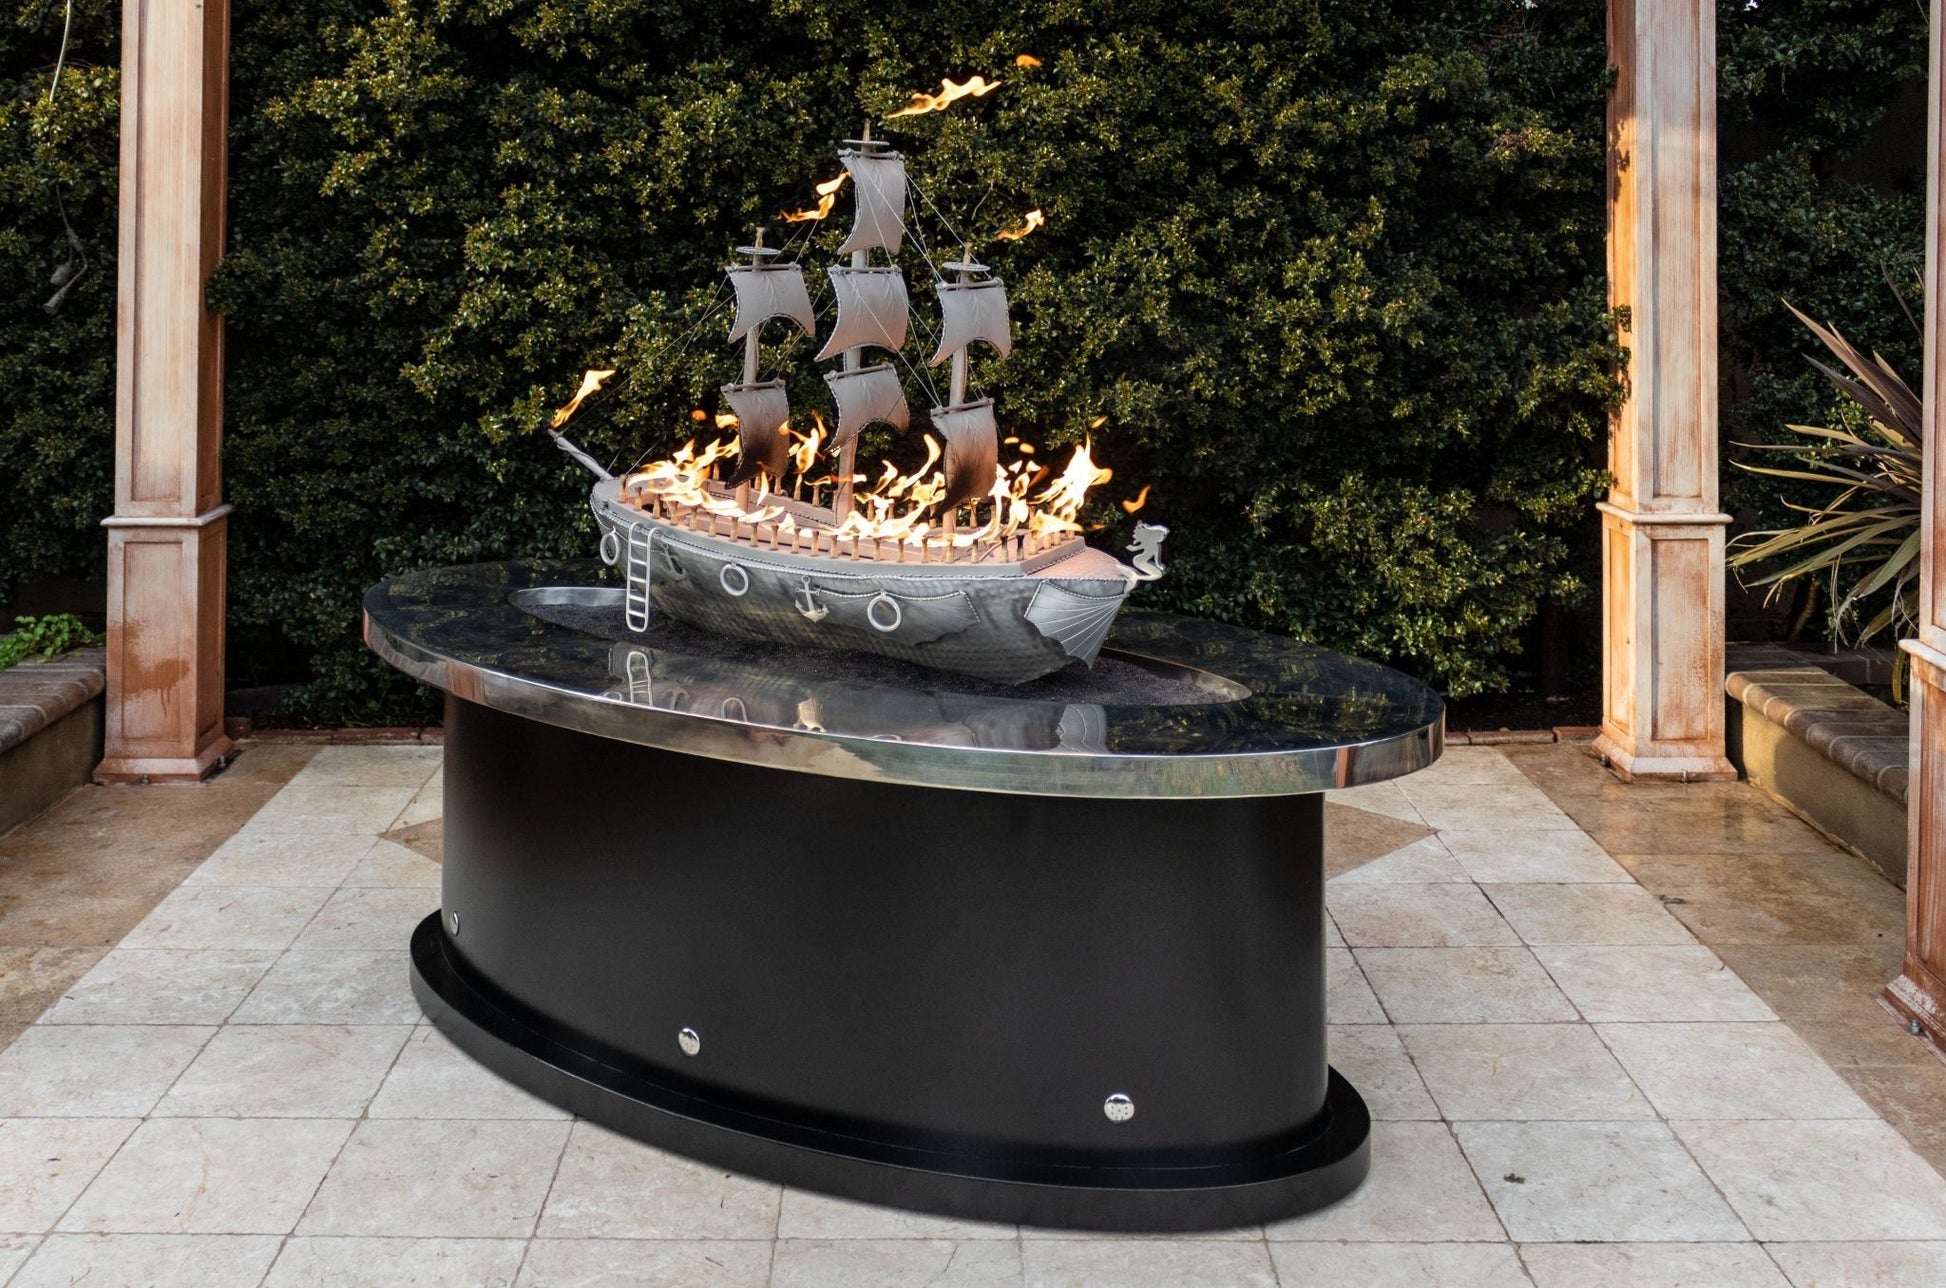 The Outdoor Plus La Pinta 72" Pewter Powder Coated Liquid Propane Fire Pit with Match Lit Ignition